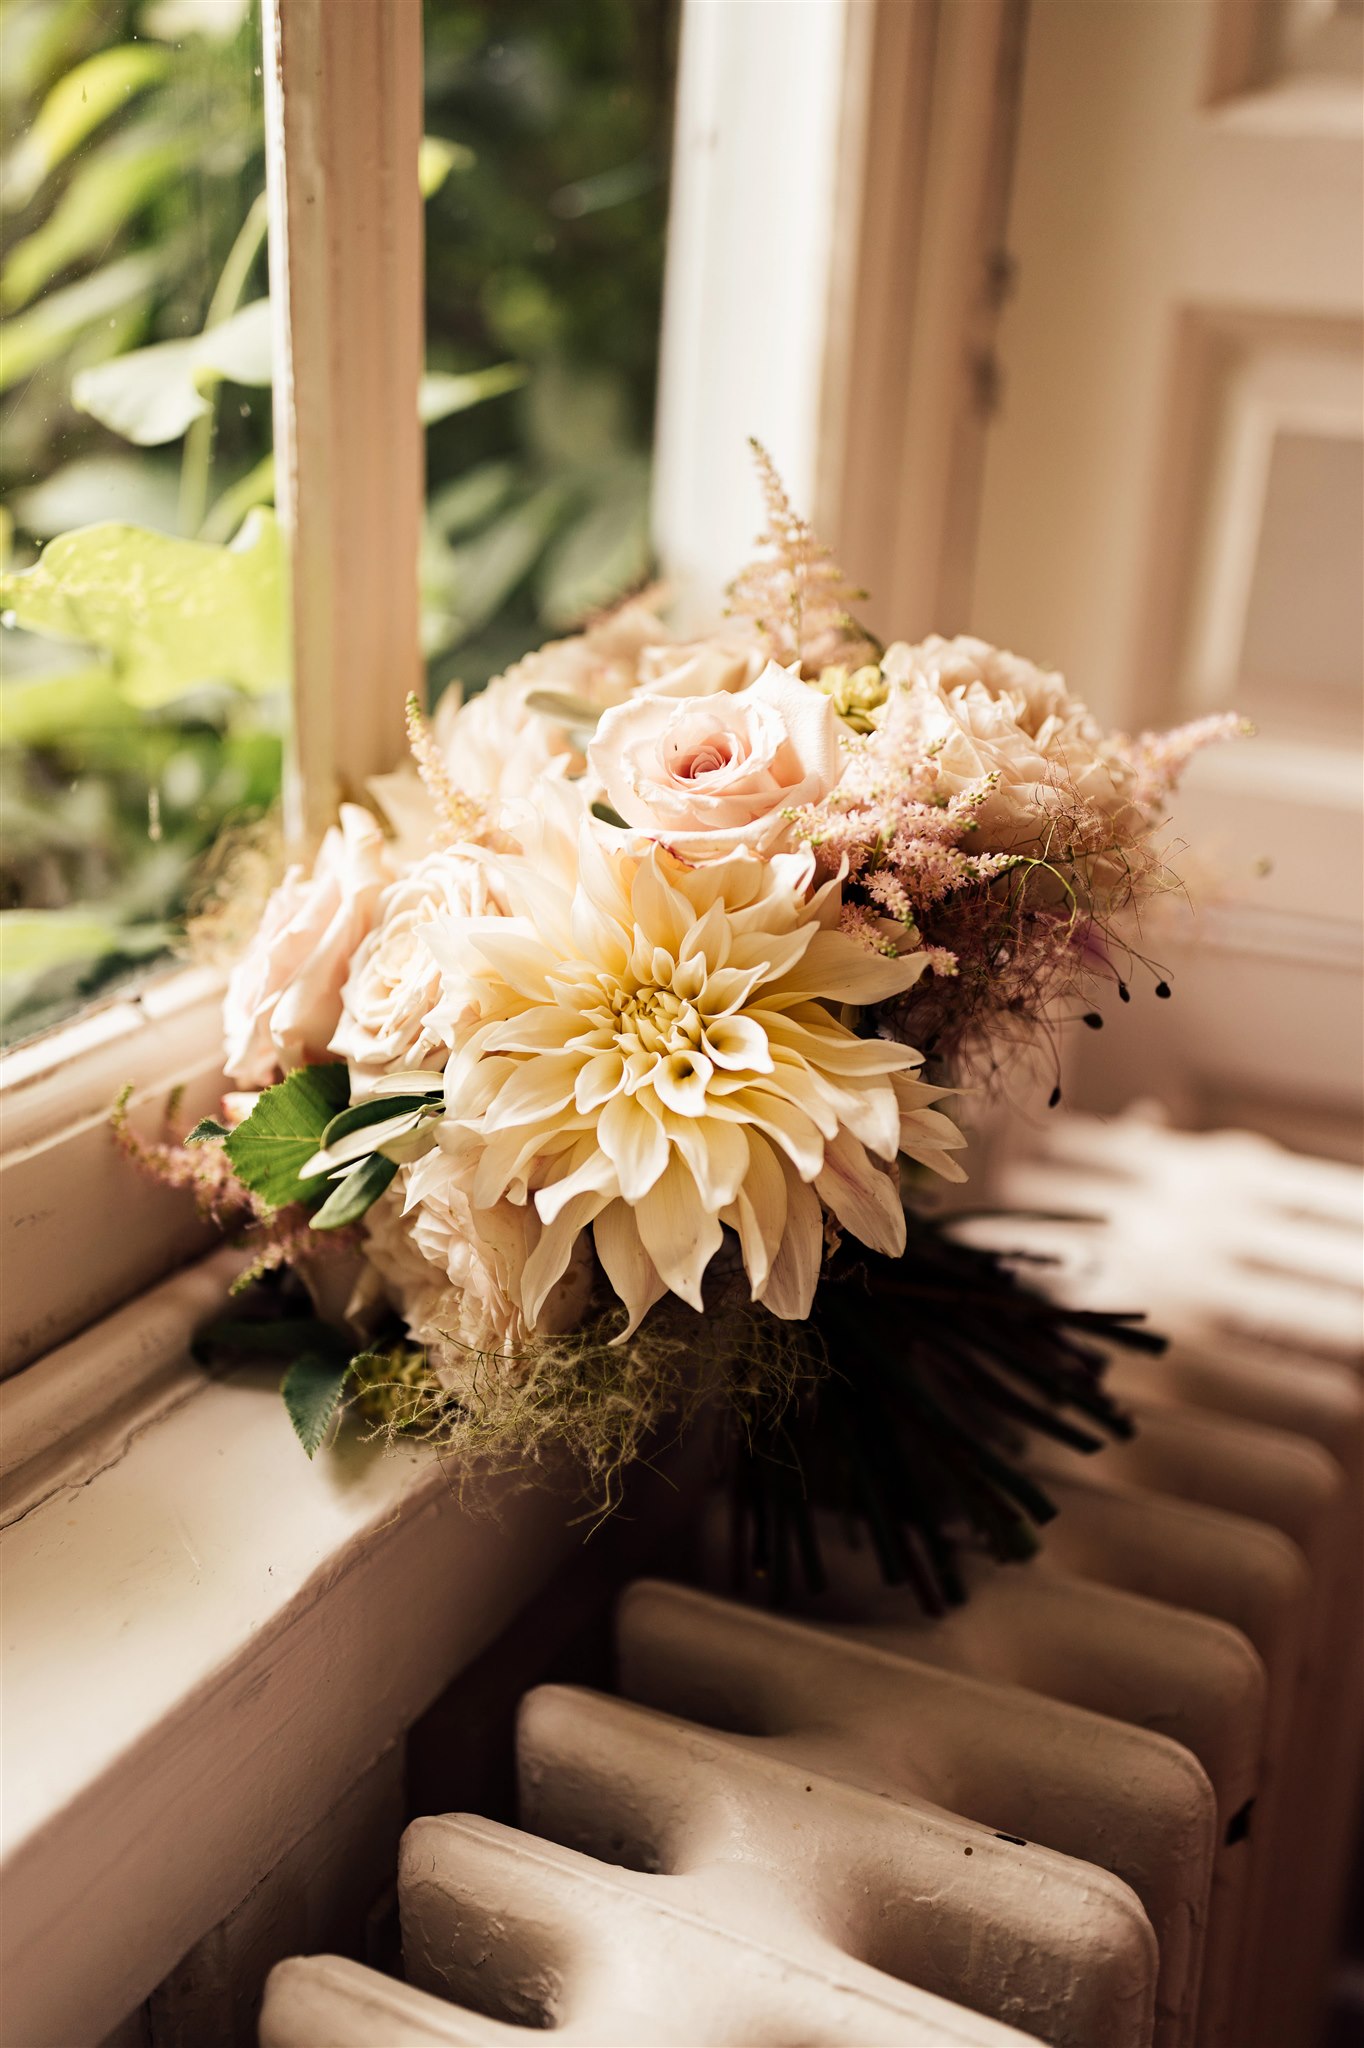 A wedding bouquet made up of roses and dahlias in blush pink and caramel tones sits on a radiator next to a window